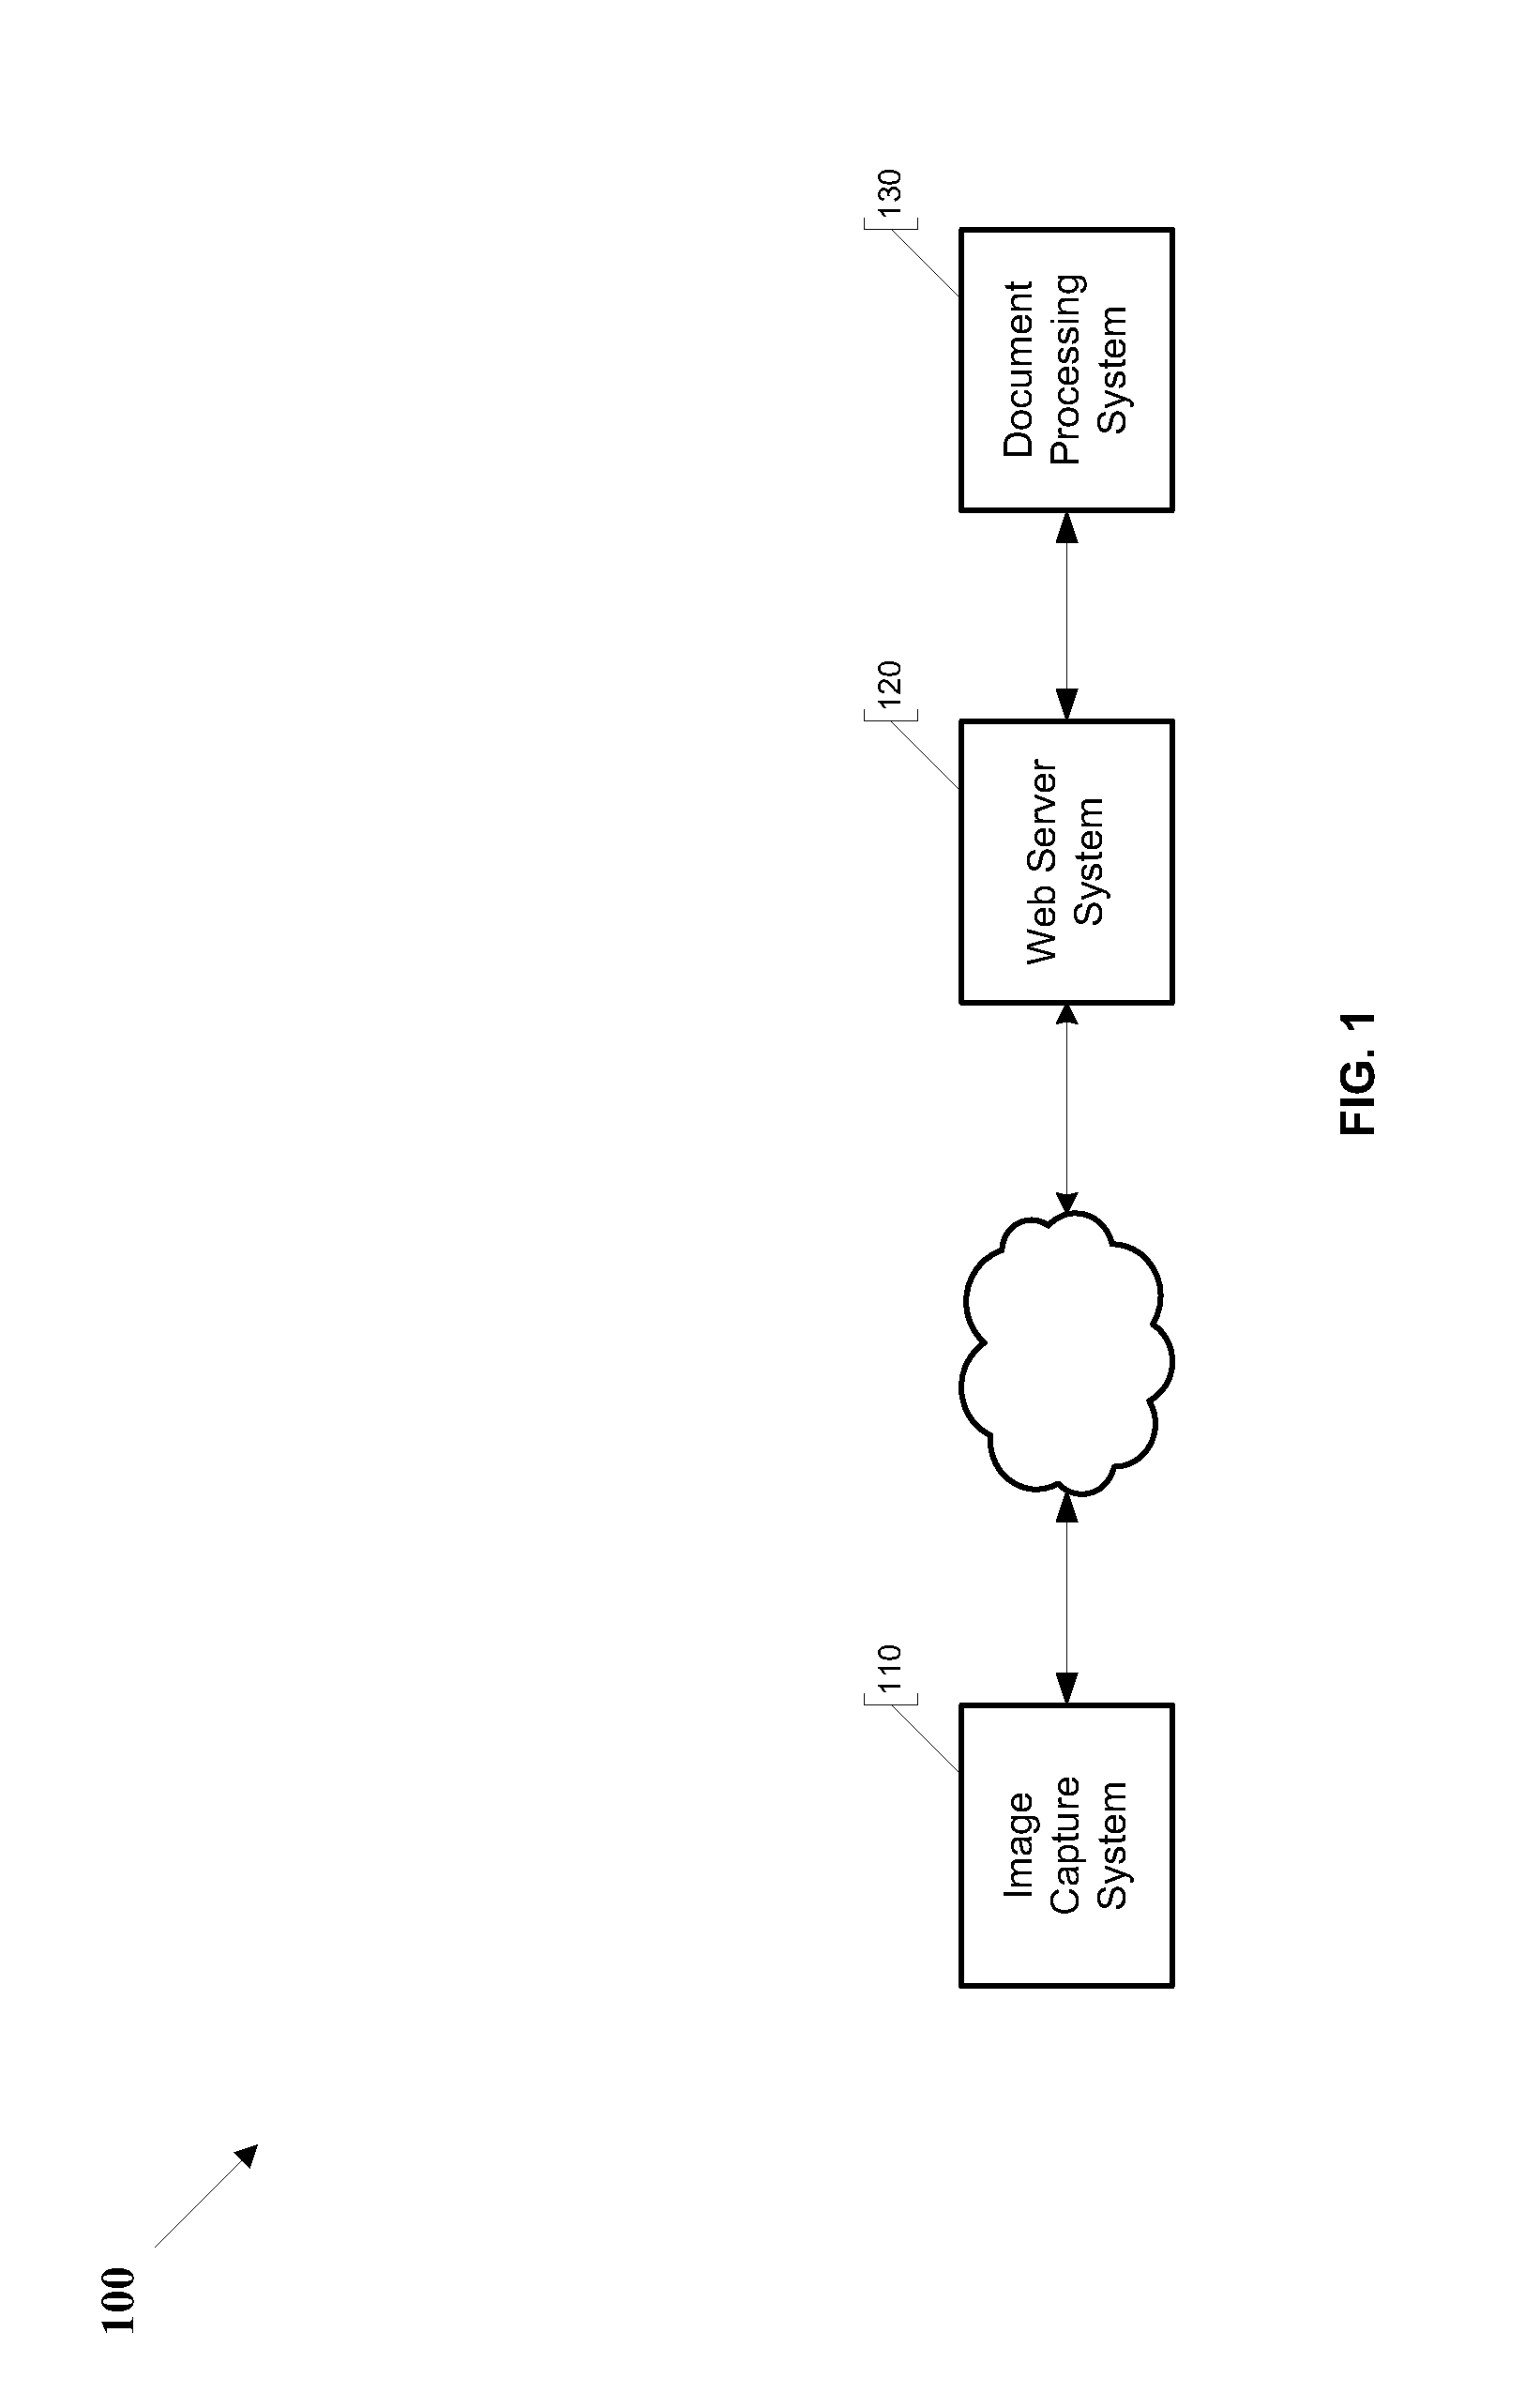 Systems and methods for training document analysis system for automatically extracting data from documents